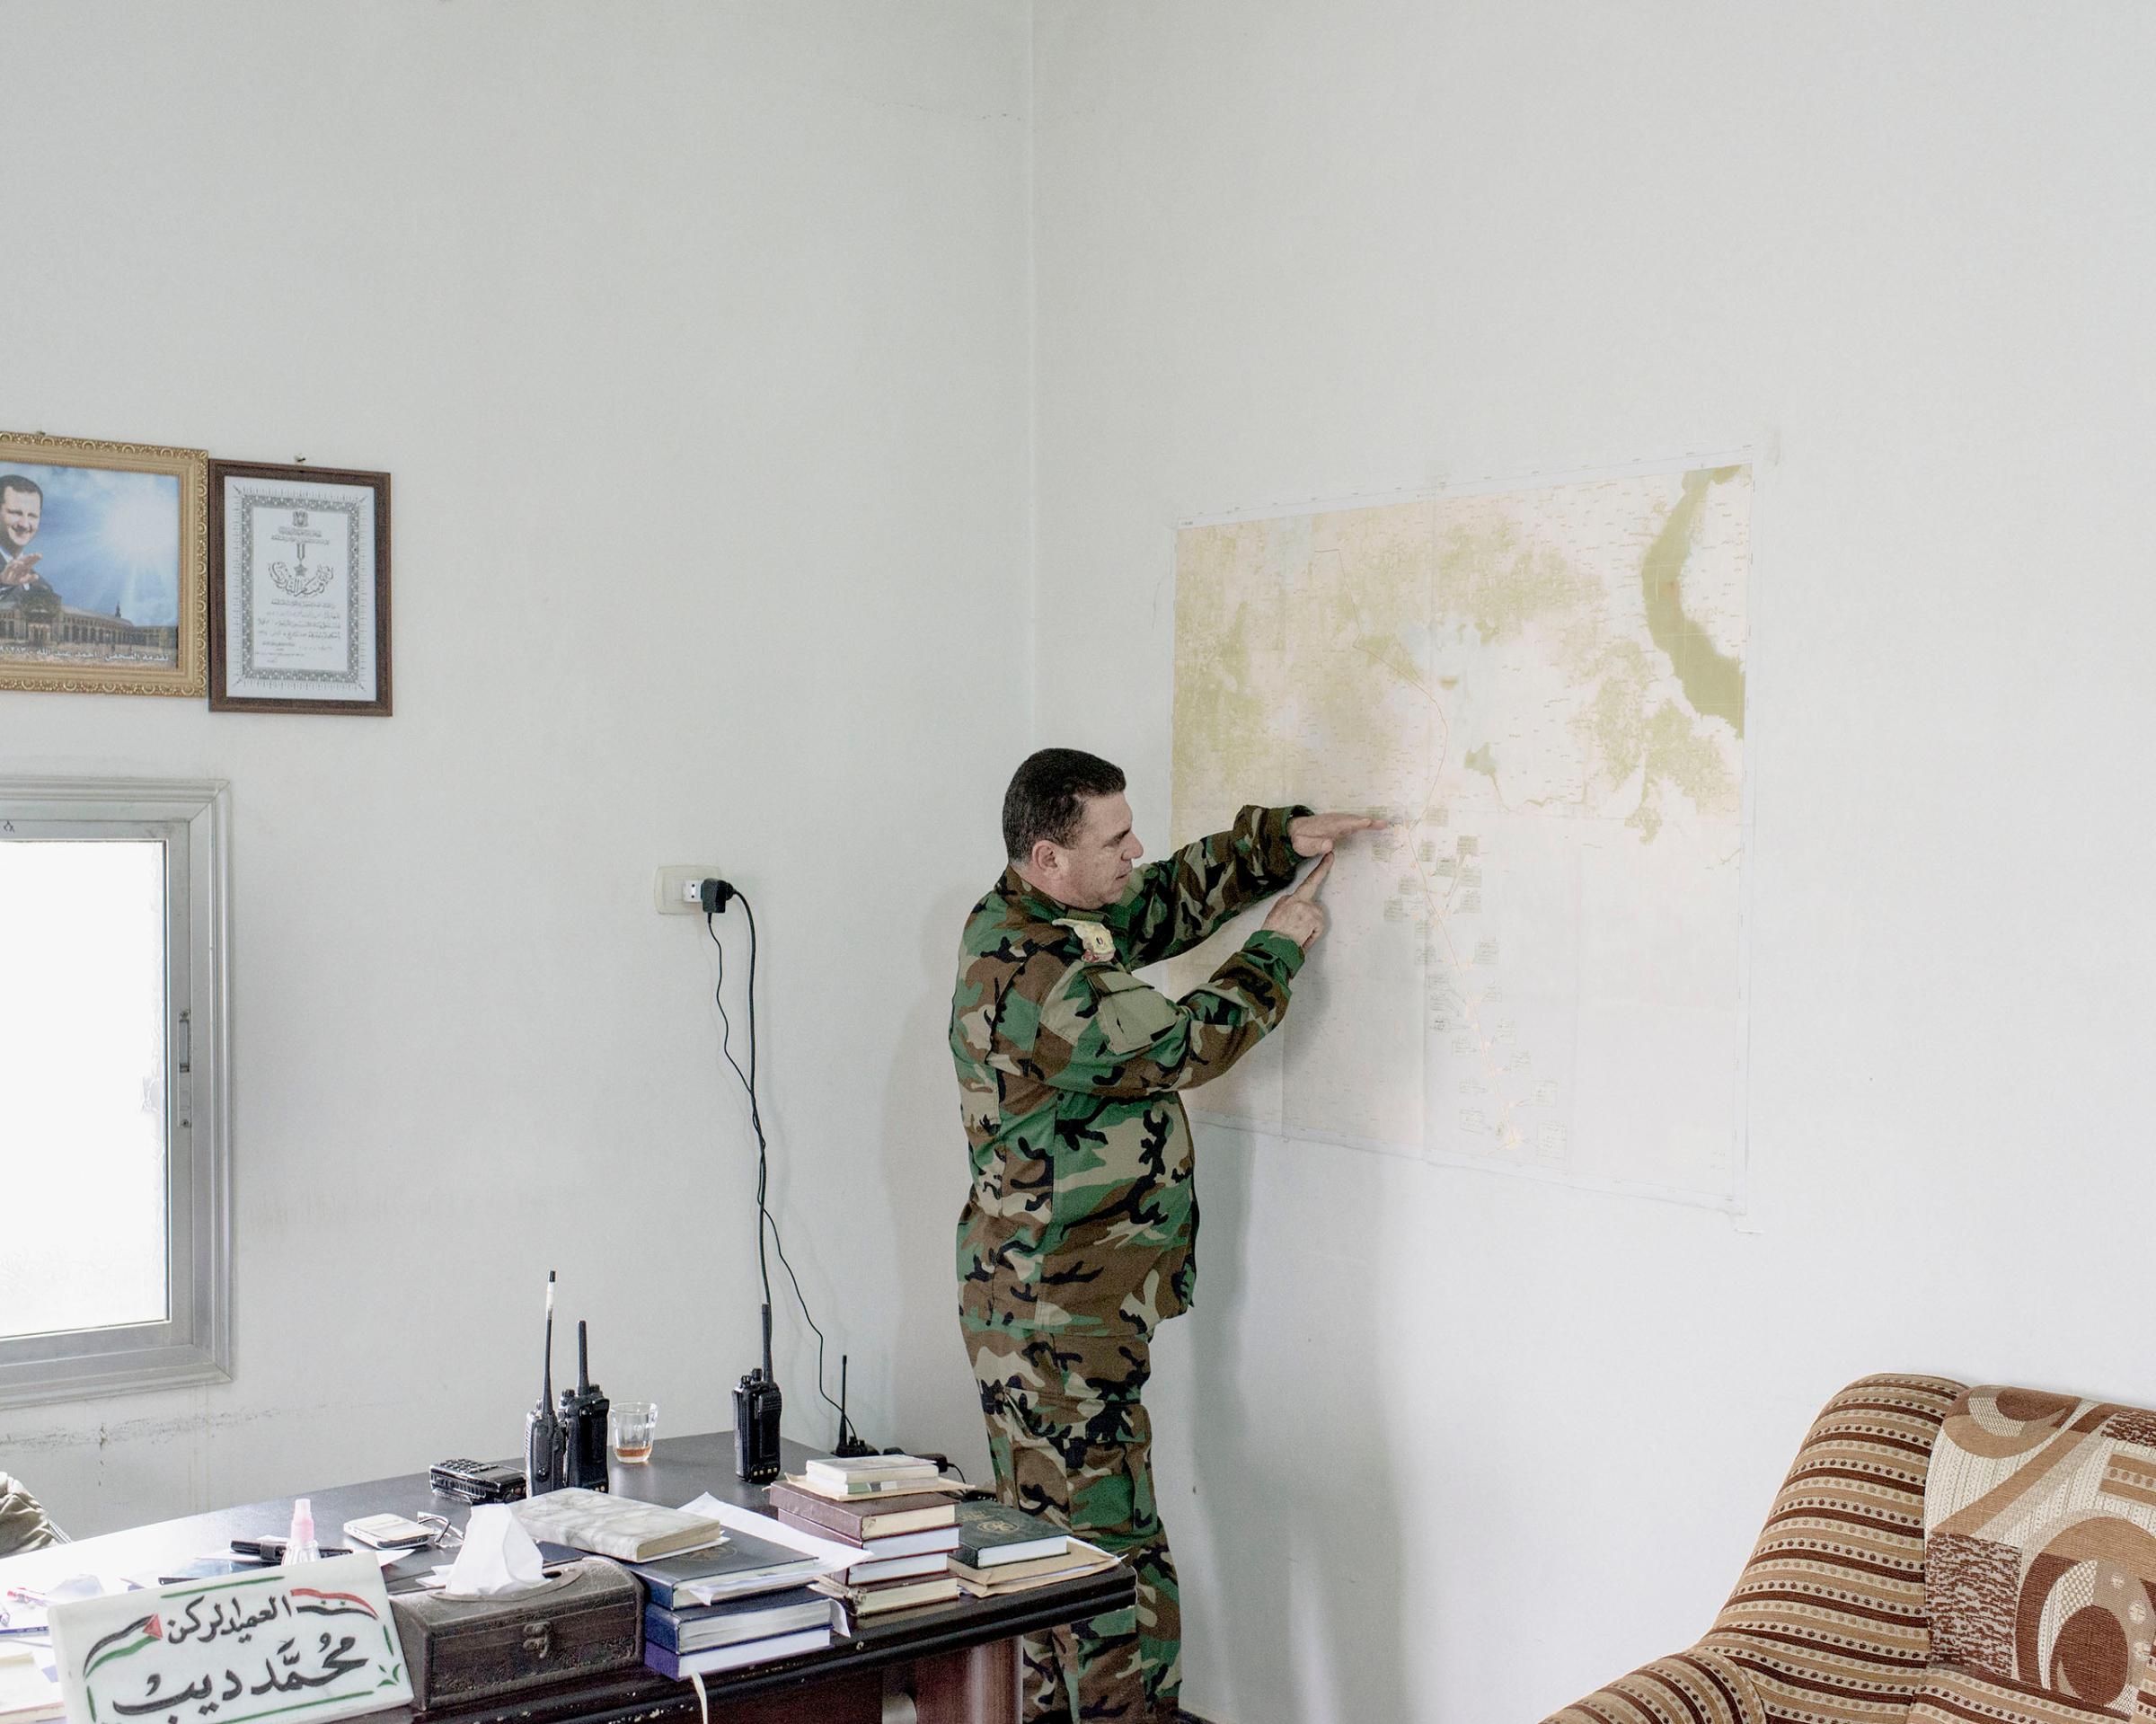 On the road between Homs and Aleppo, a Syrian army commander in charge of keeping the road to Aleppo open points out army and ISIS positions on a map of the area. March 2016.